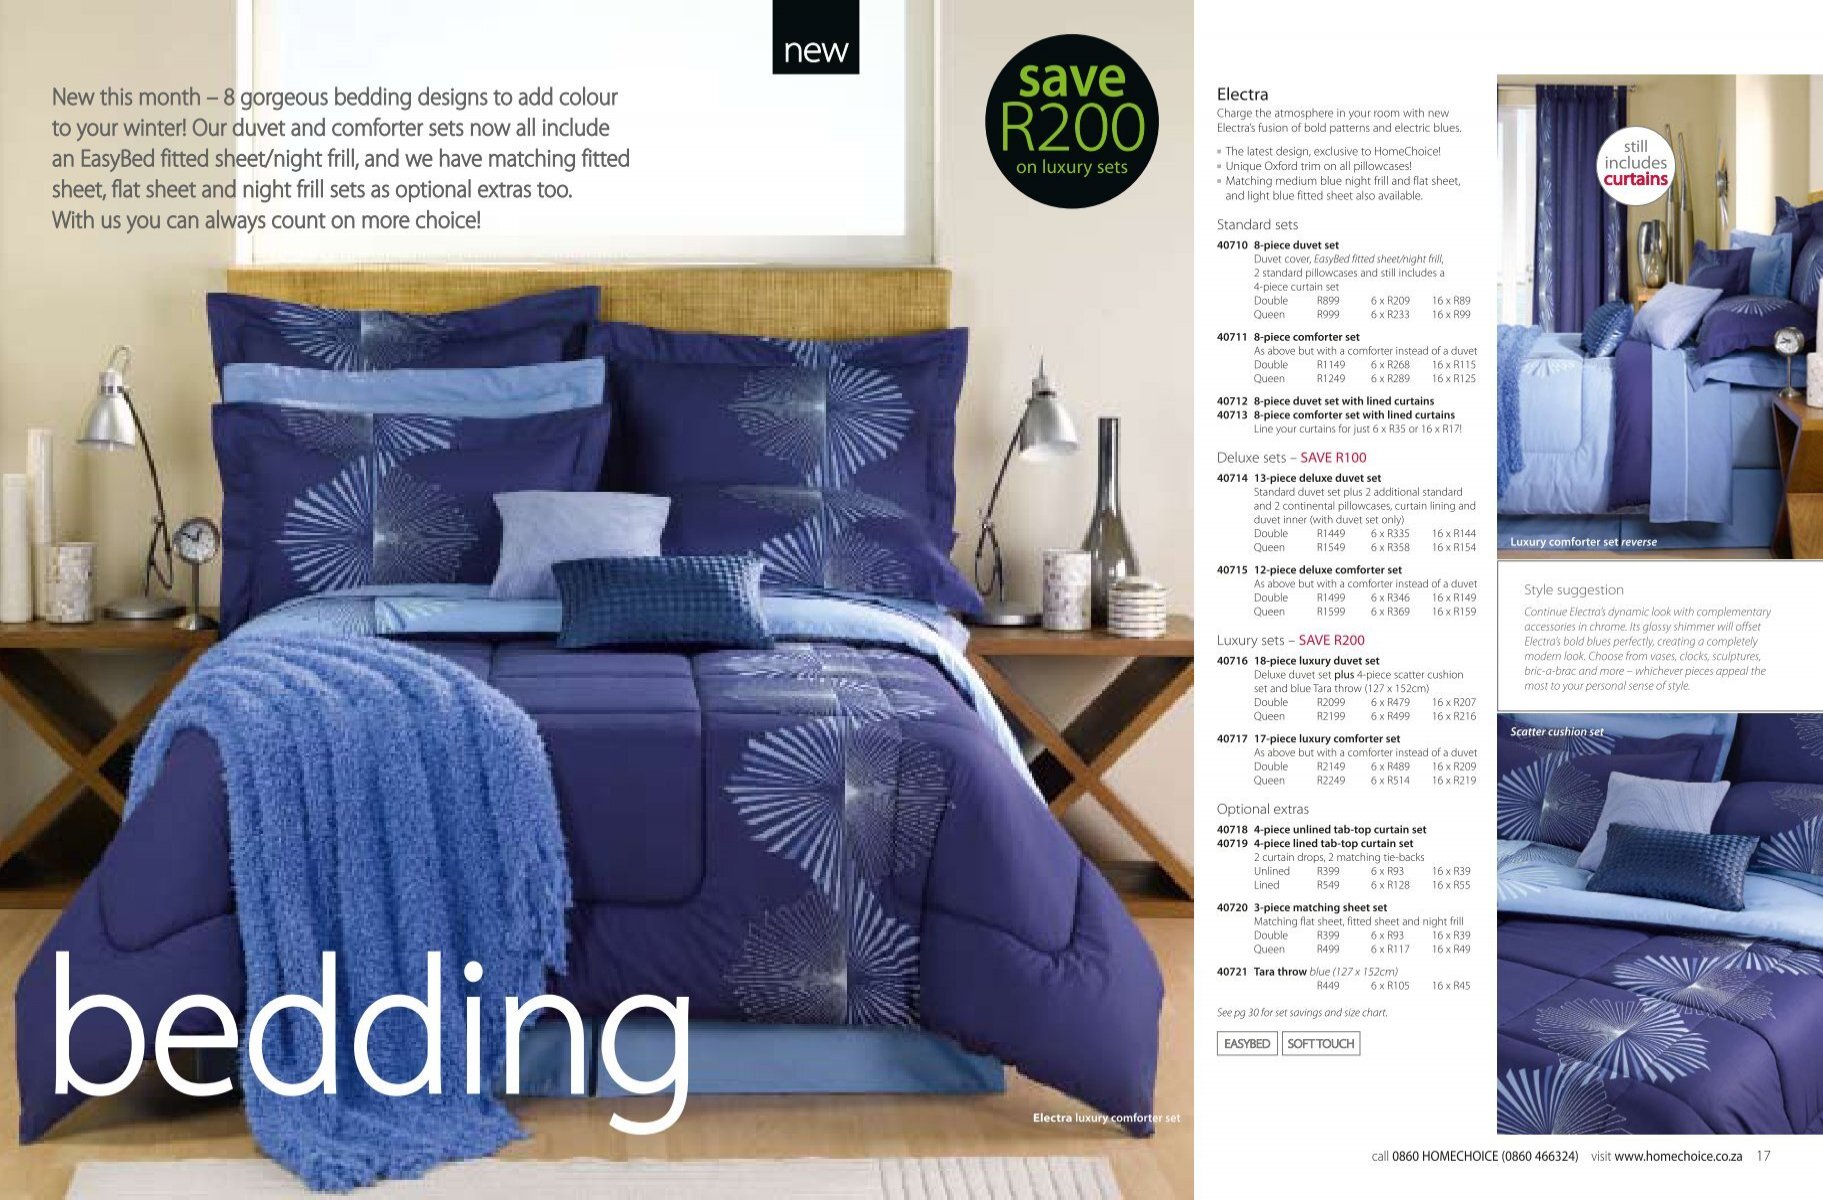 New This Month 8 Gorgeous Bedding Designs To Homechoice